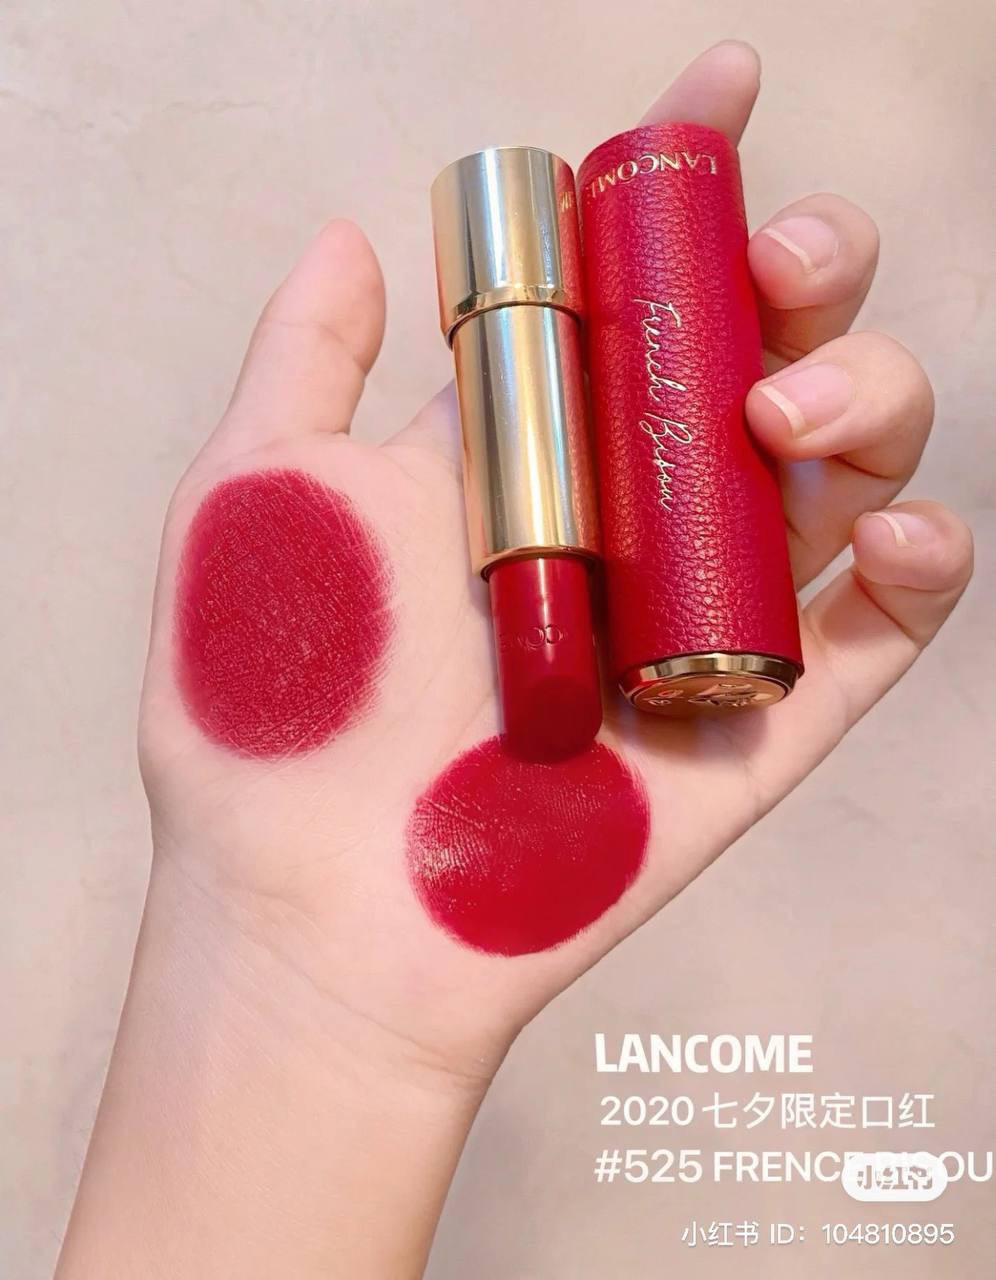 Son lancome L'absolu rouge 3.4g limited edition #525 french bisou